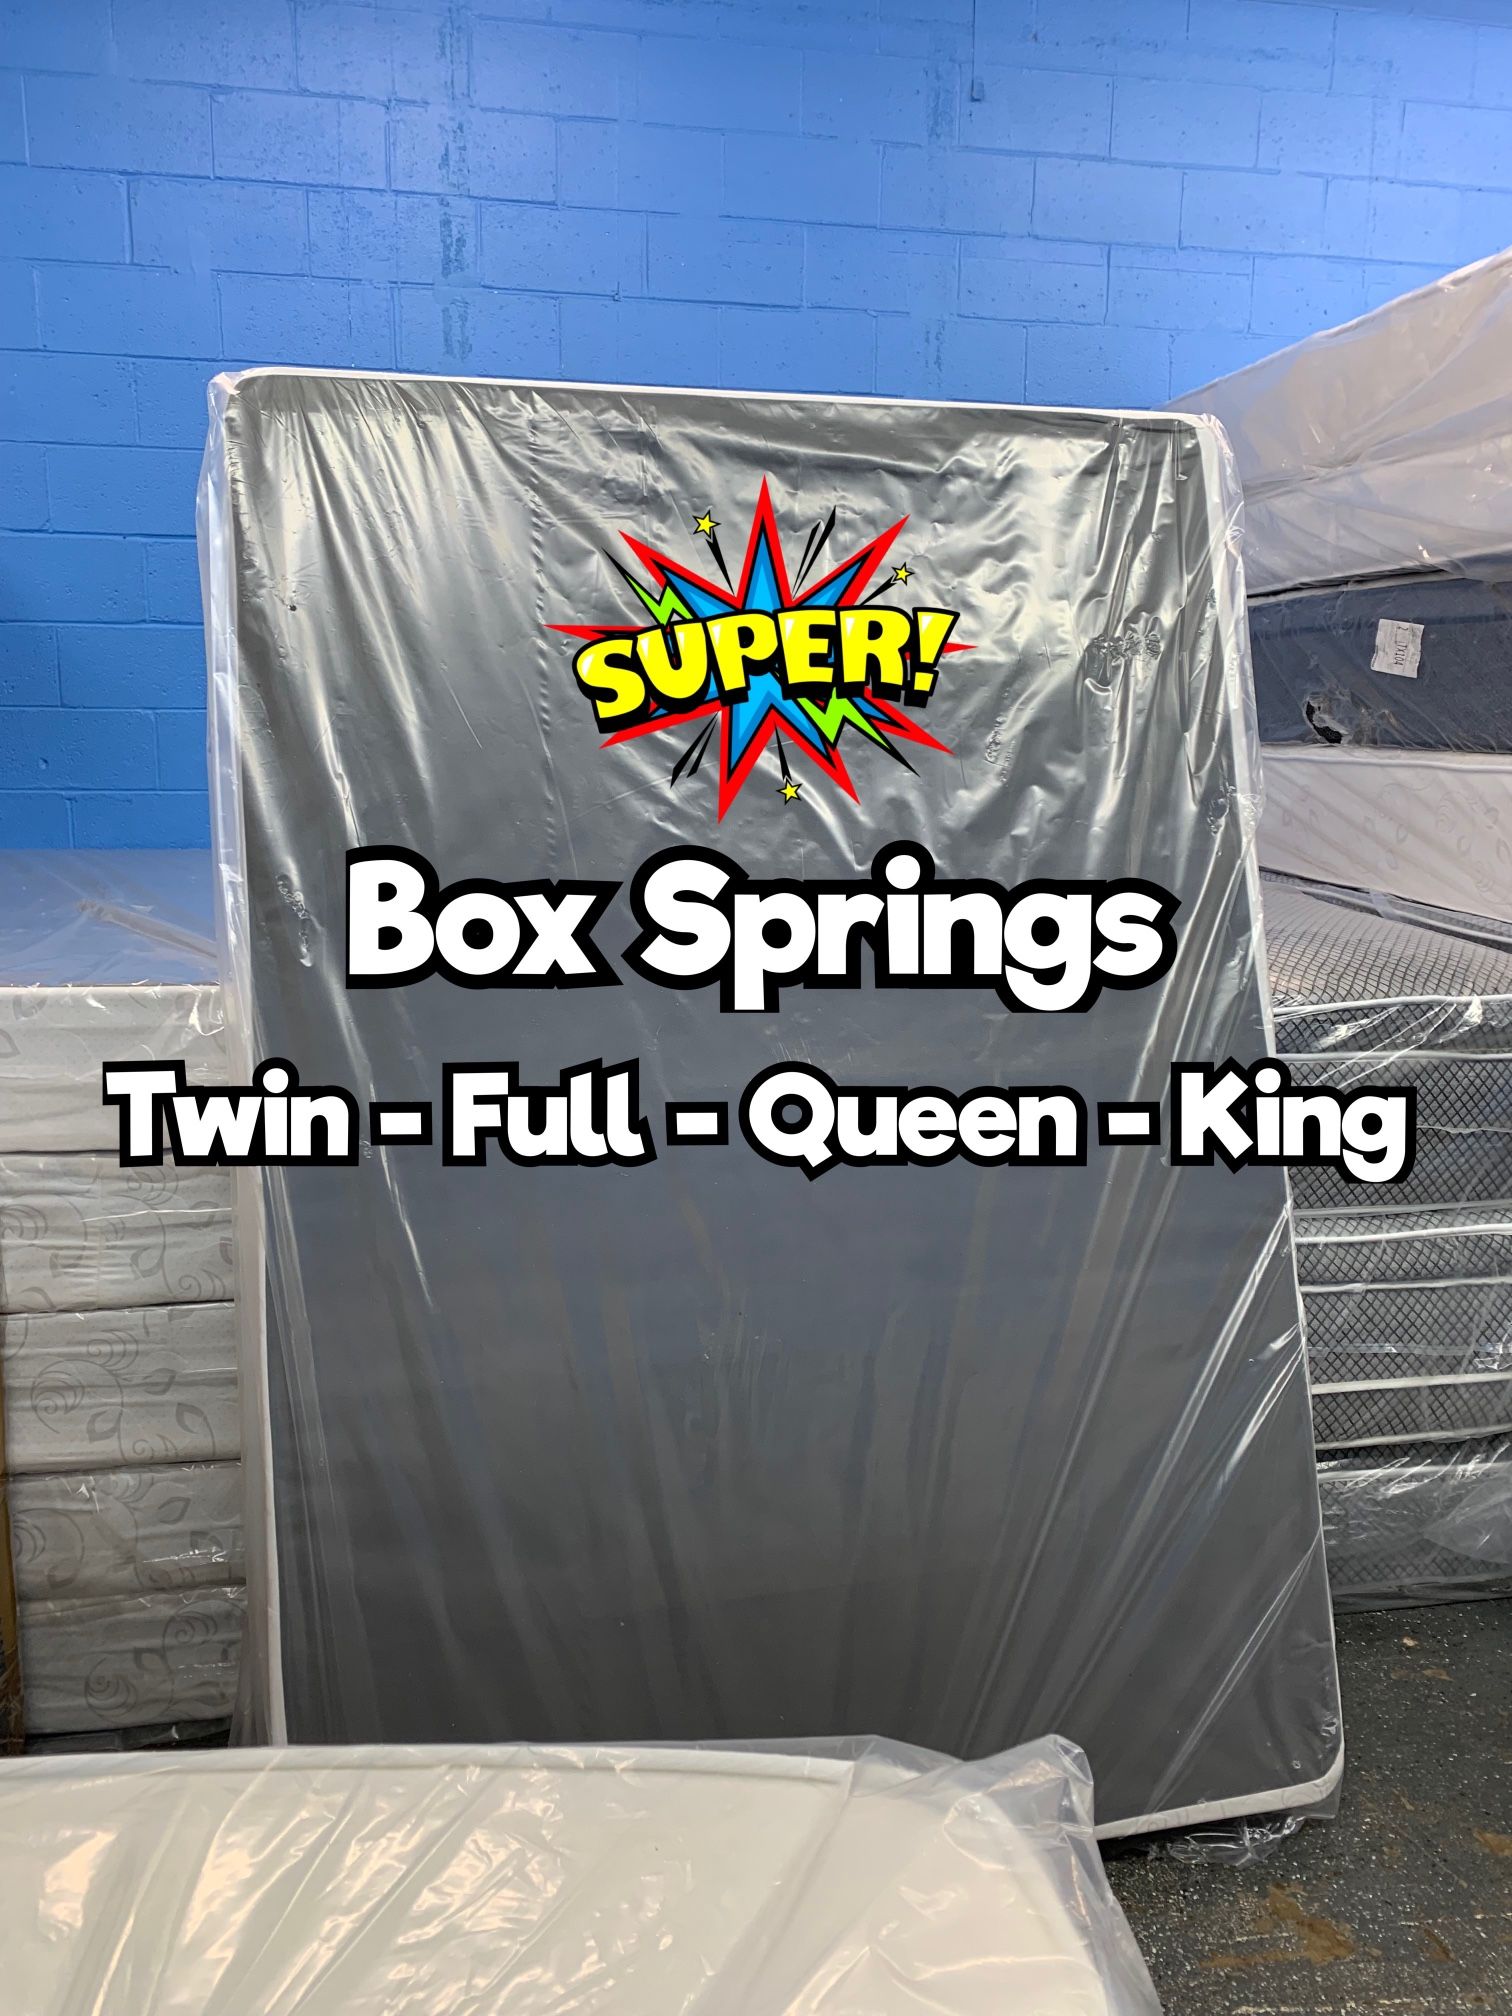 Box Springs King Queen Full Twin Box Spring 